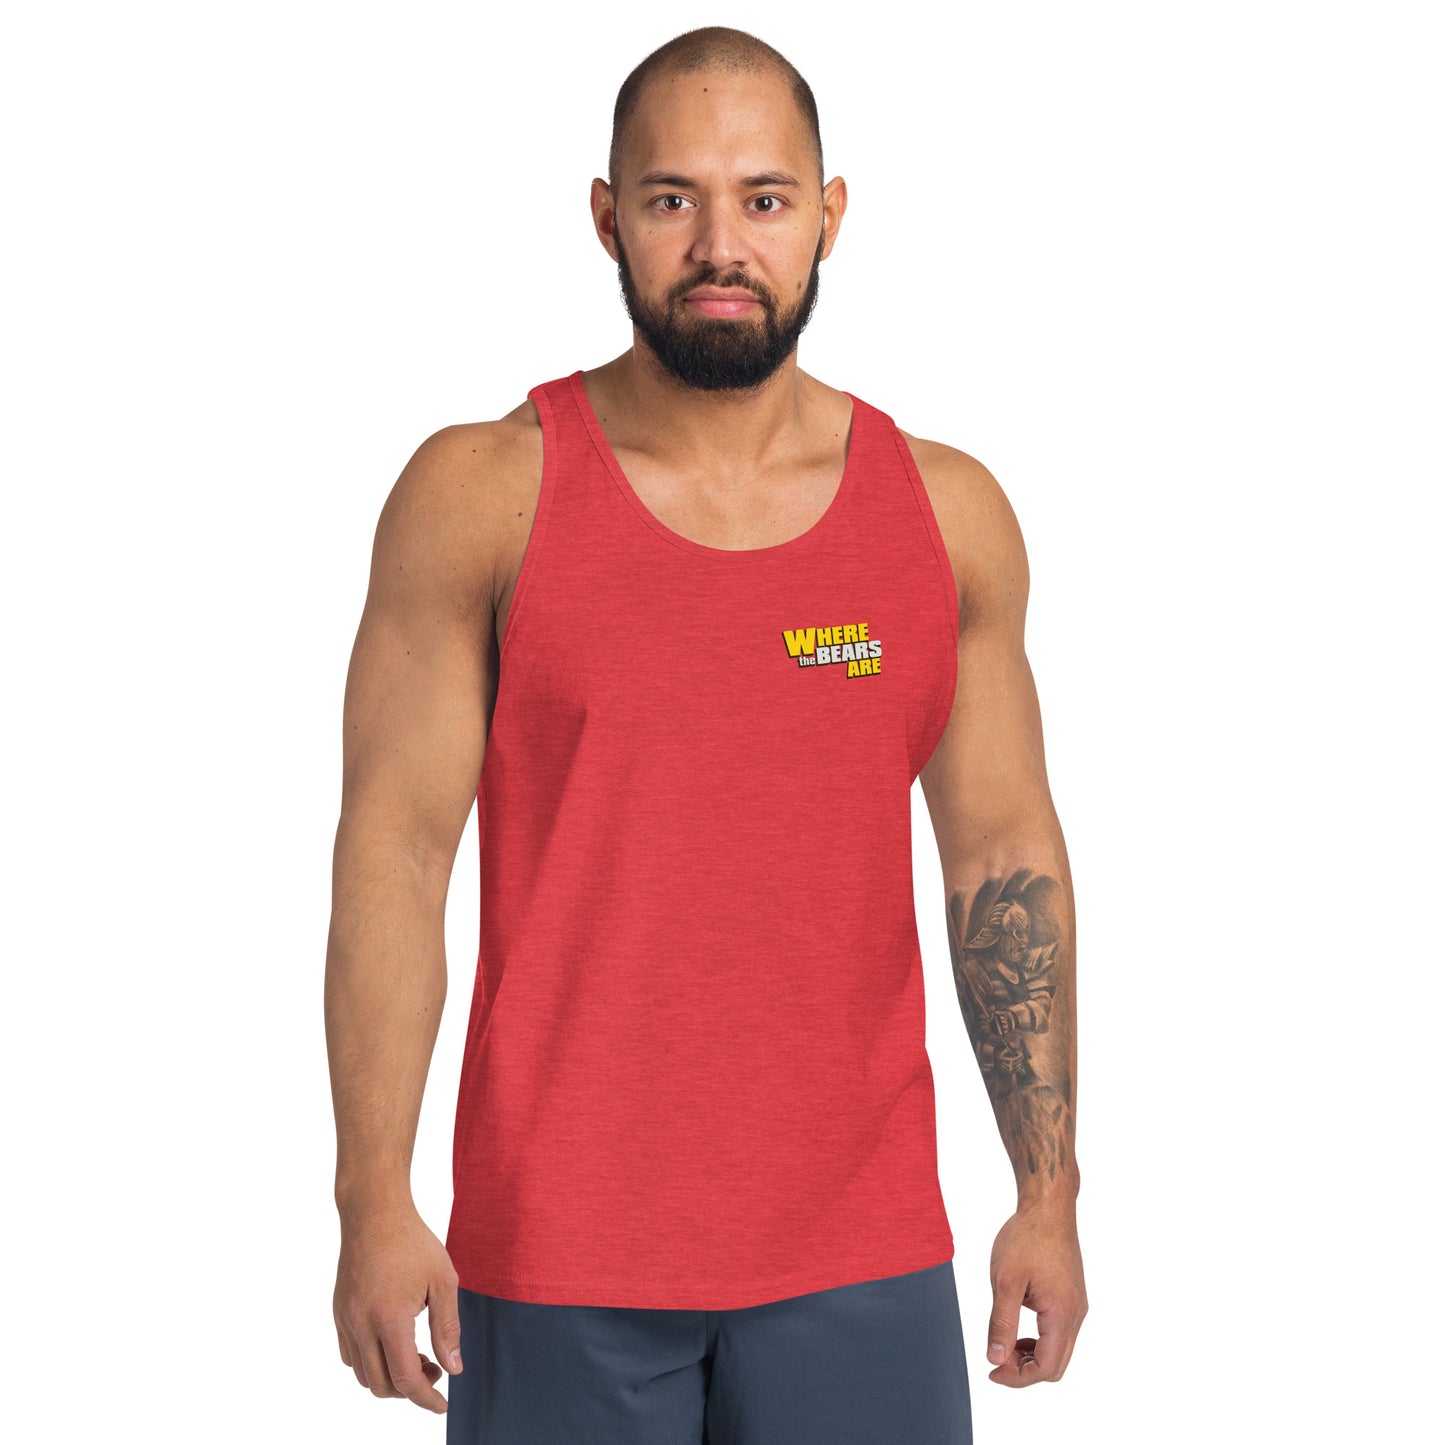 'Where The Bears Are' Small Logo Unisex Tank Top